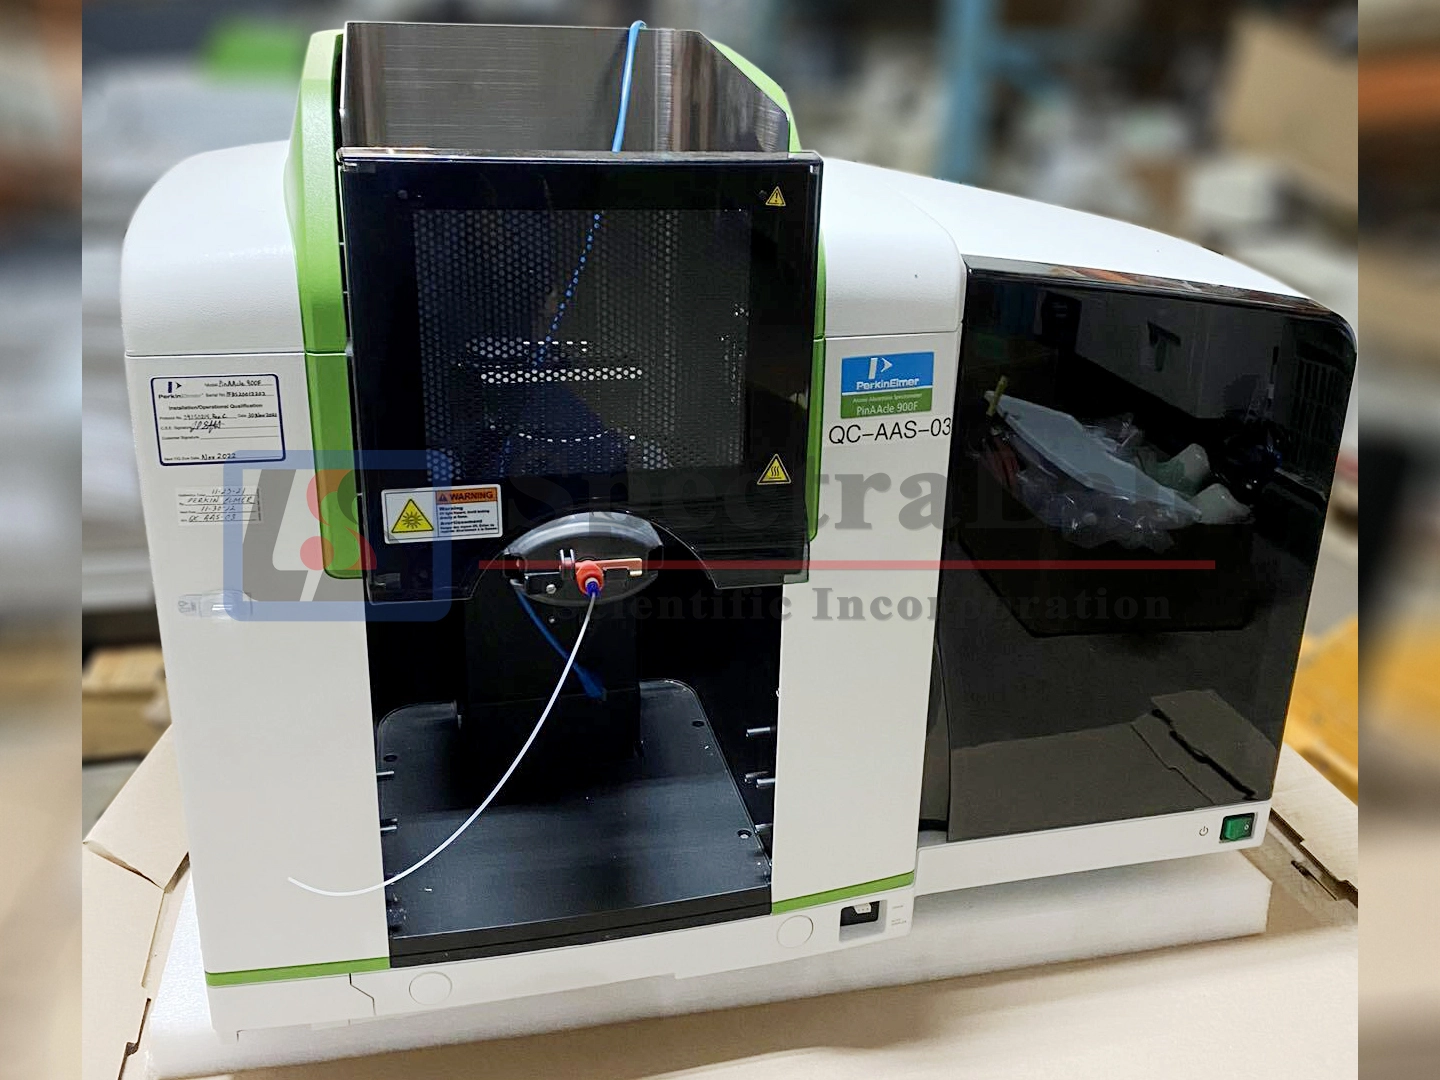 PerkinElmer PinAAcle 900F Flame Atomic Absorption Spectrometer (2020)